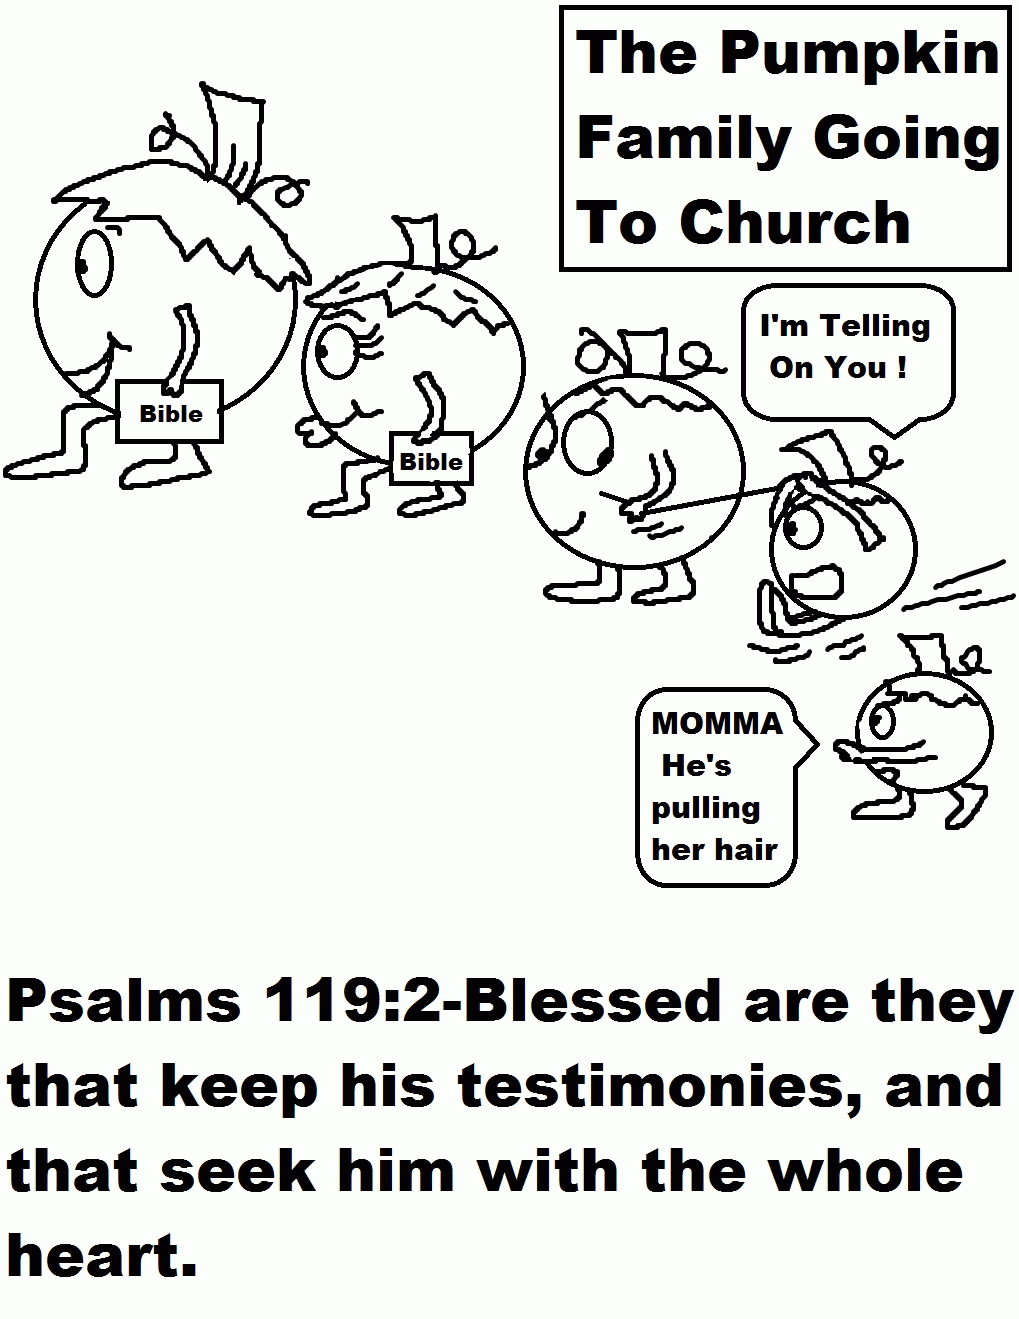 Pumpkin Family Going To Church Coloring Page (1019a?1319